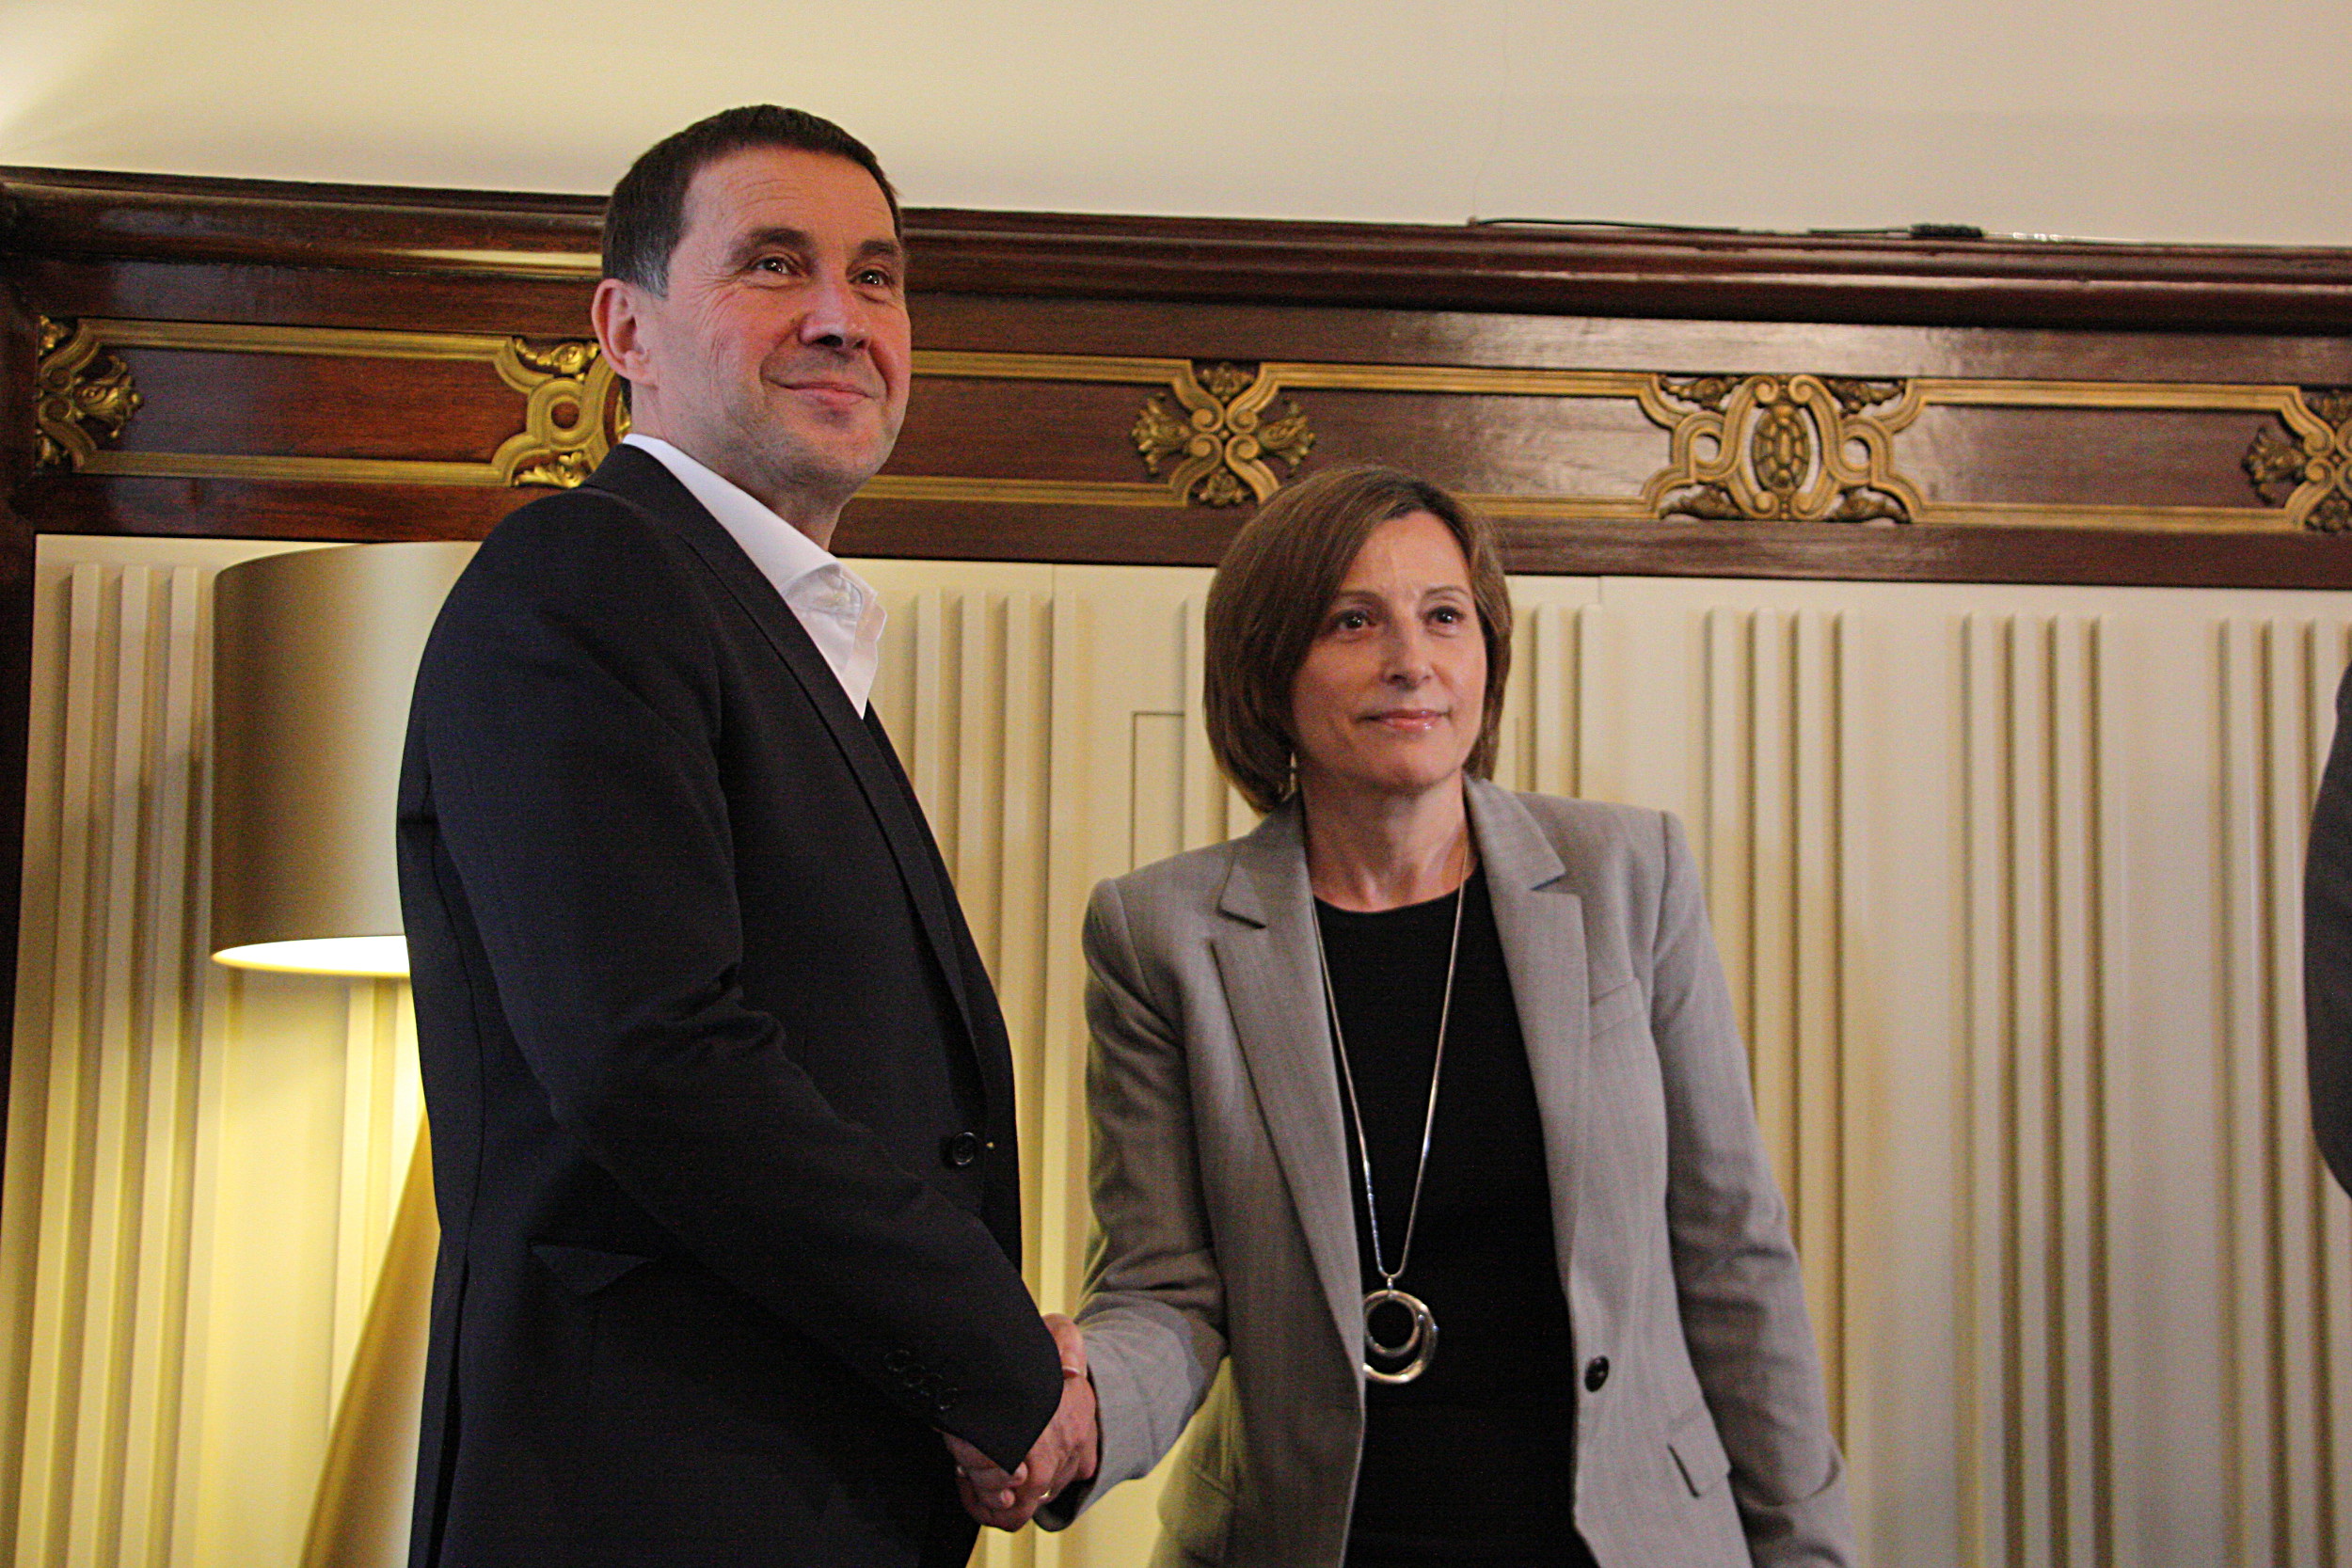 Parliament’s President, Carme Forcadell, received this Wednesday the visit of Basque politician and Secretary General of ‘abertzale’ separatist party Sortu, Arnaldo Otegi (by ACN)